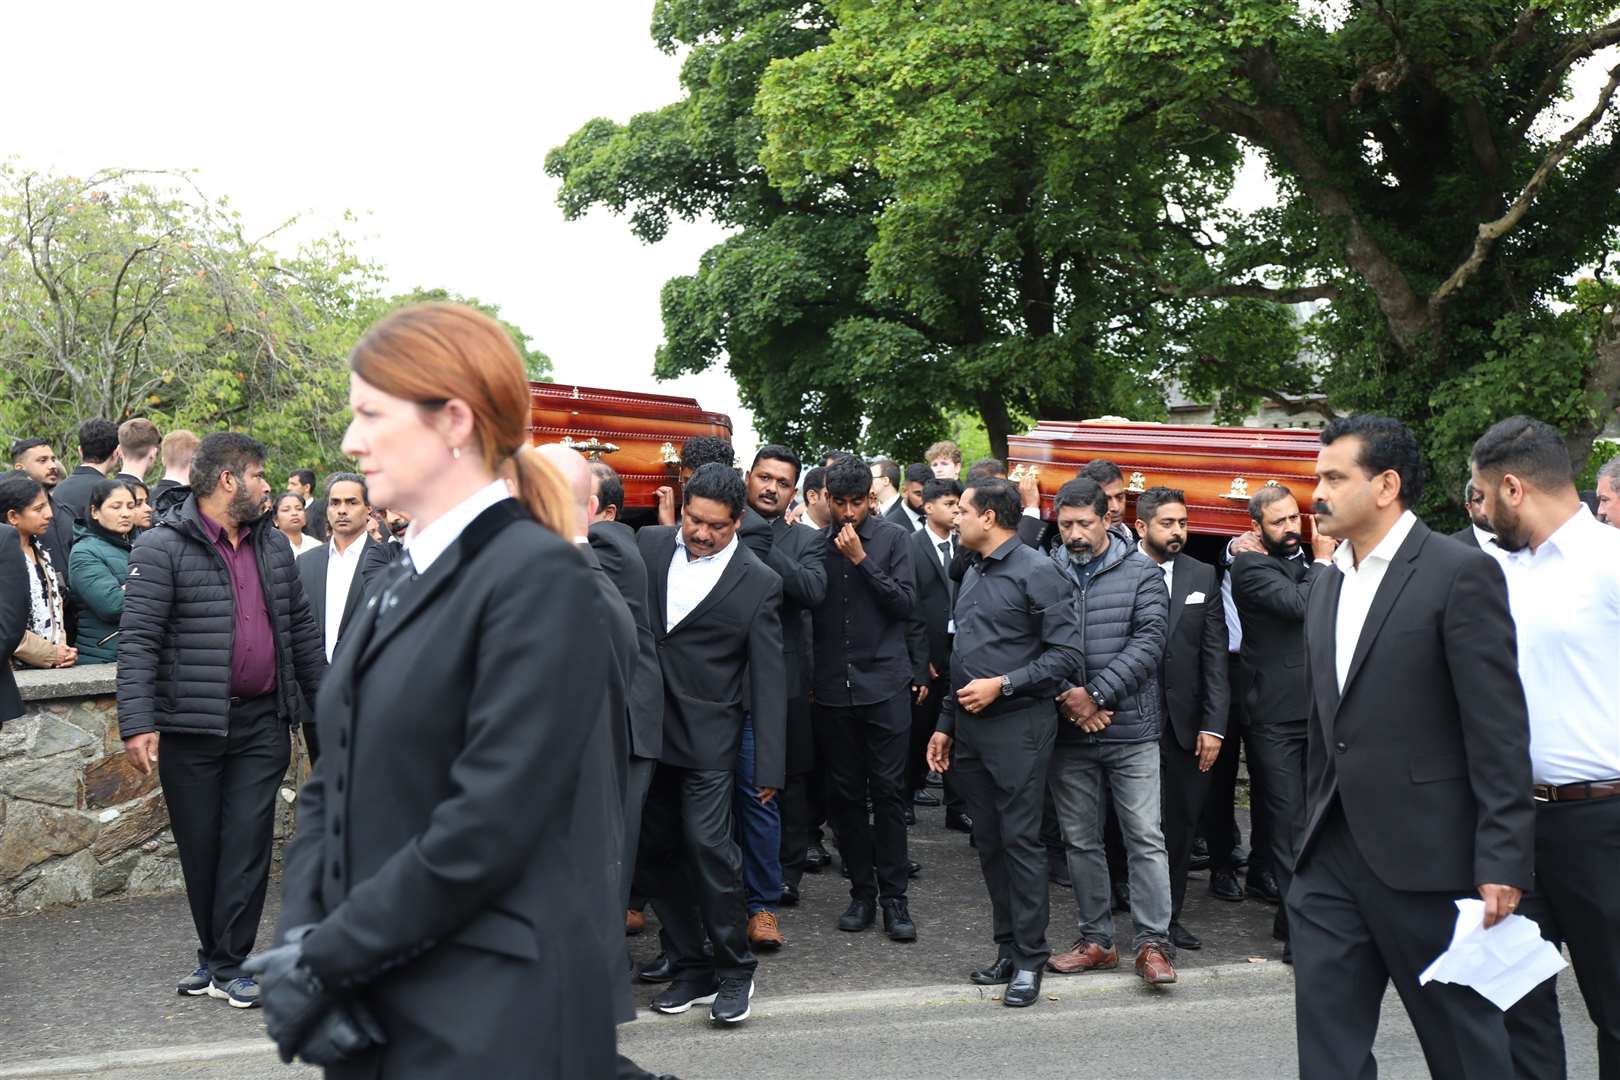 The congregation at their joint funeral service heard the deaths were ‘nothing short of unbearable’ (Joe Boland/PA)